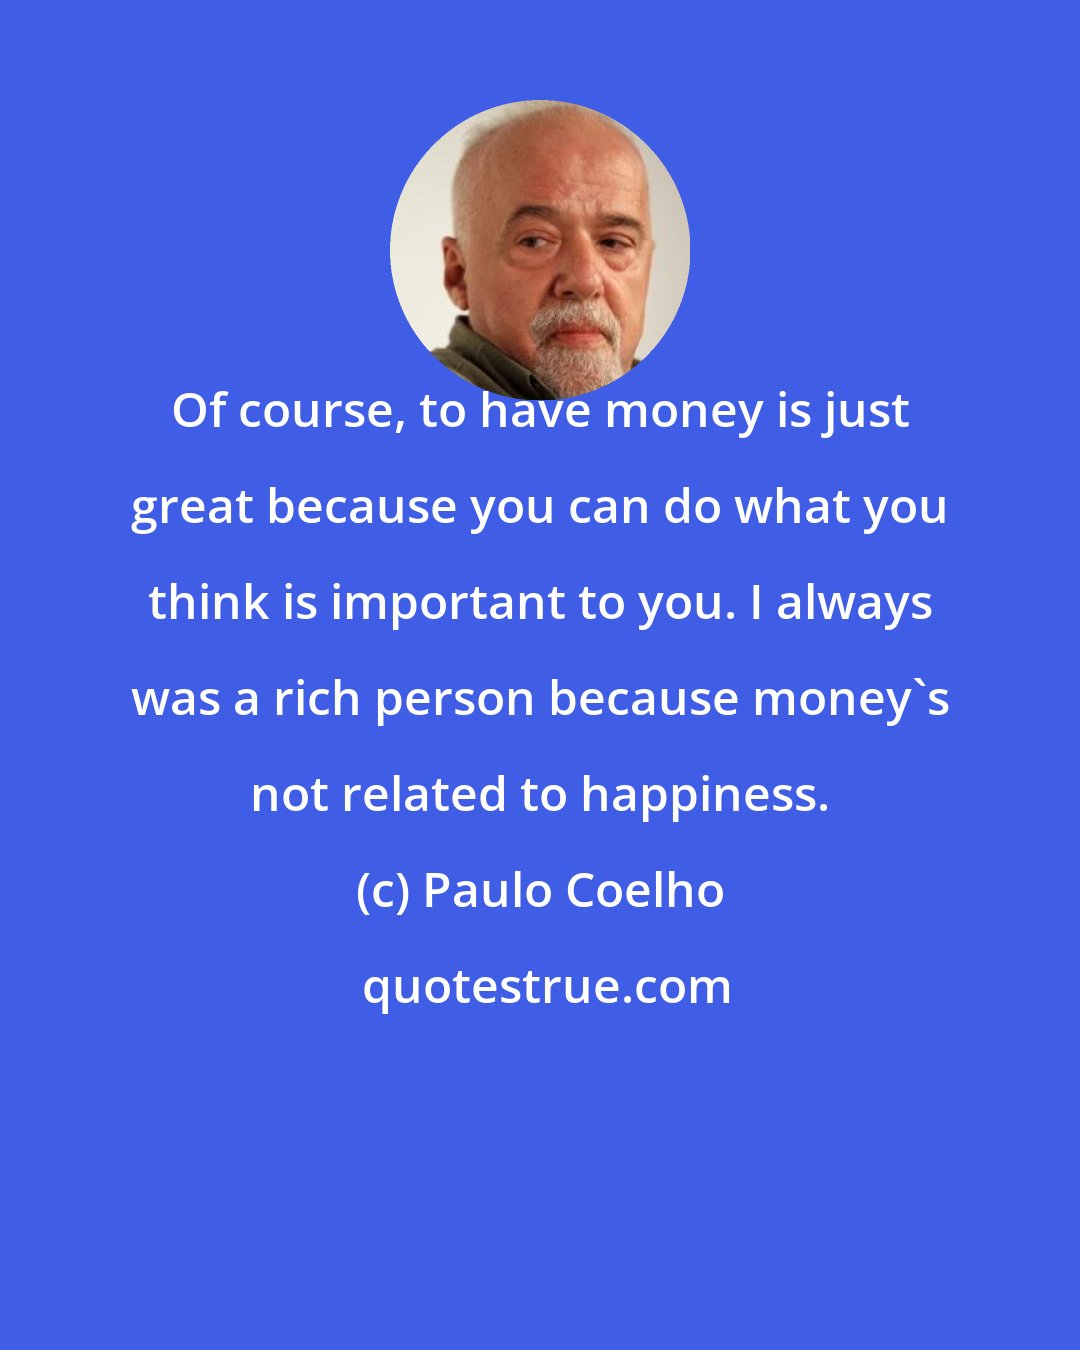 Paulo Coelho: Of course, to have money is just great because you can do what you think is important to you. I always was a rich person because money's not related to happiness.